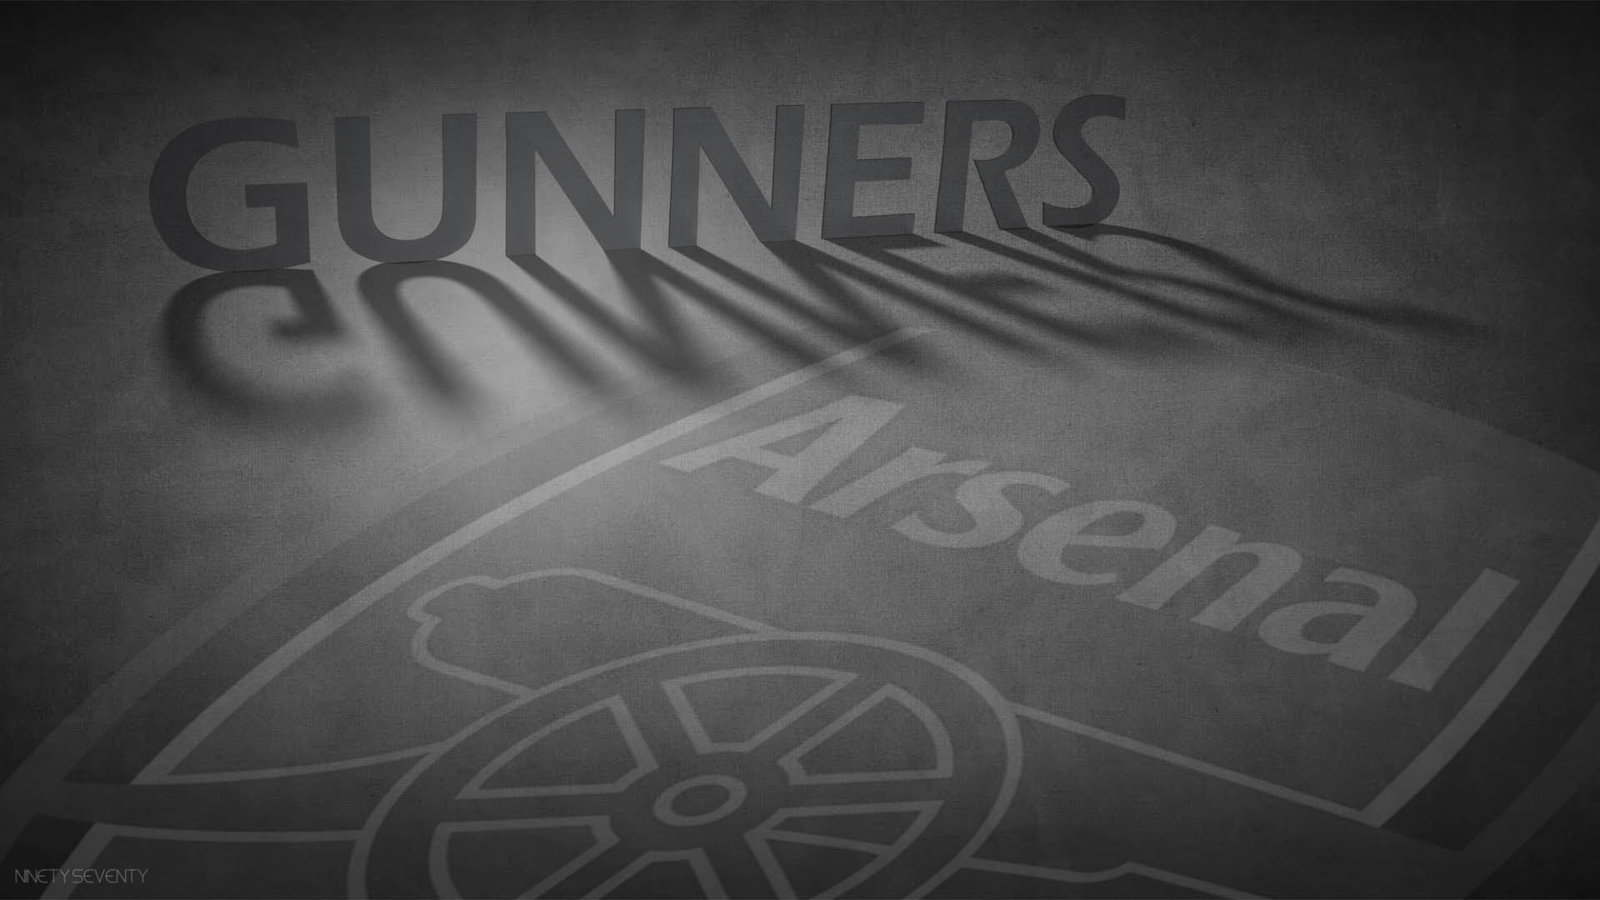 arsenal wallpaper image is high definition wallpaper you can make 1600x900